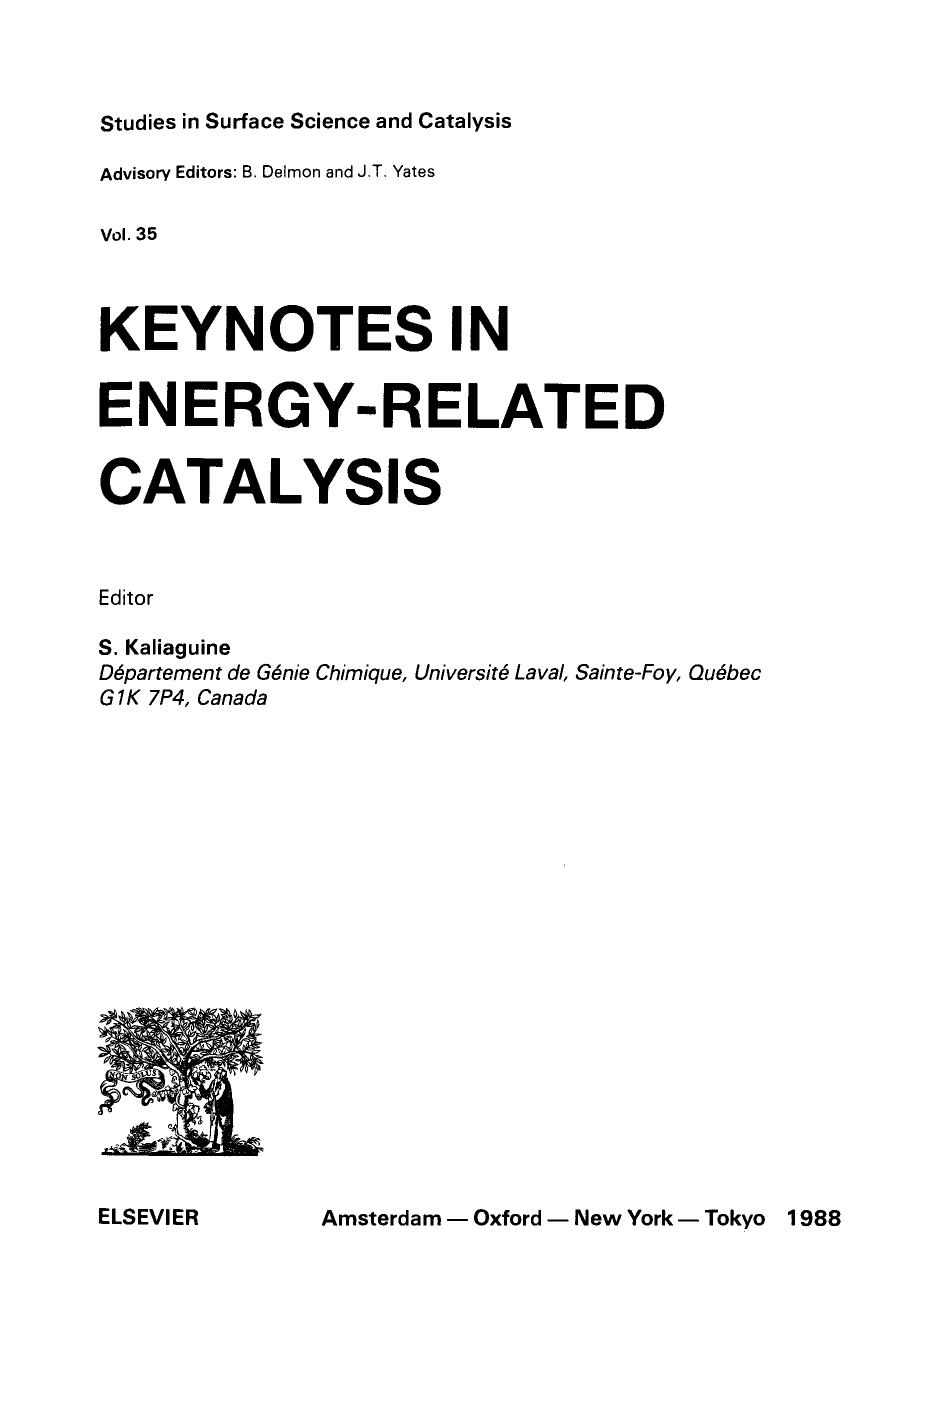 035. Keynotes in Energy-Related Catalysis (1988) by 4<8=8AB@0B>@